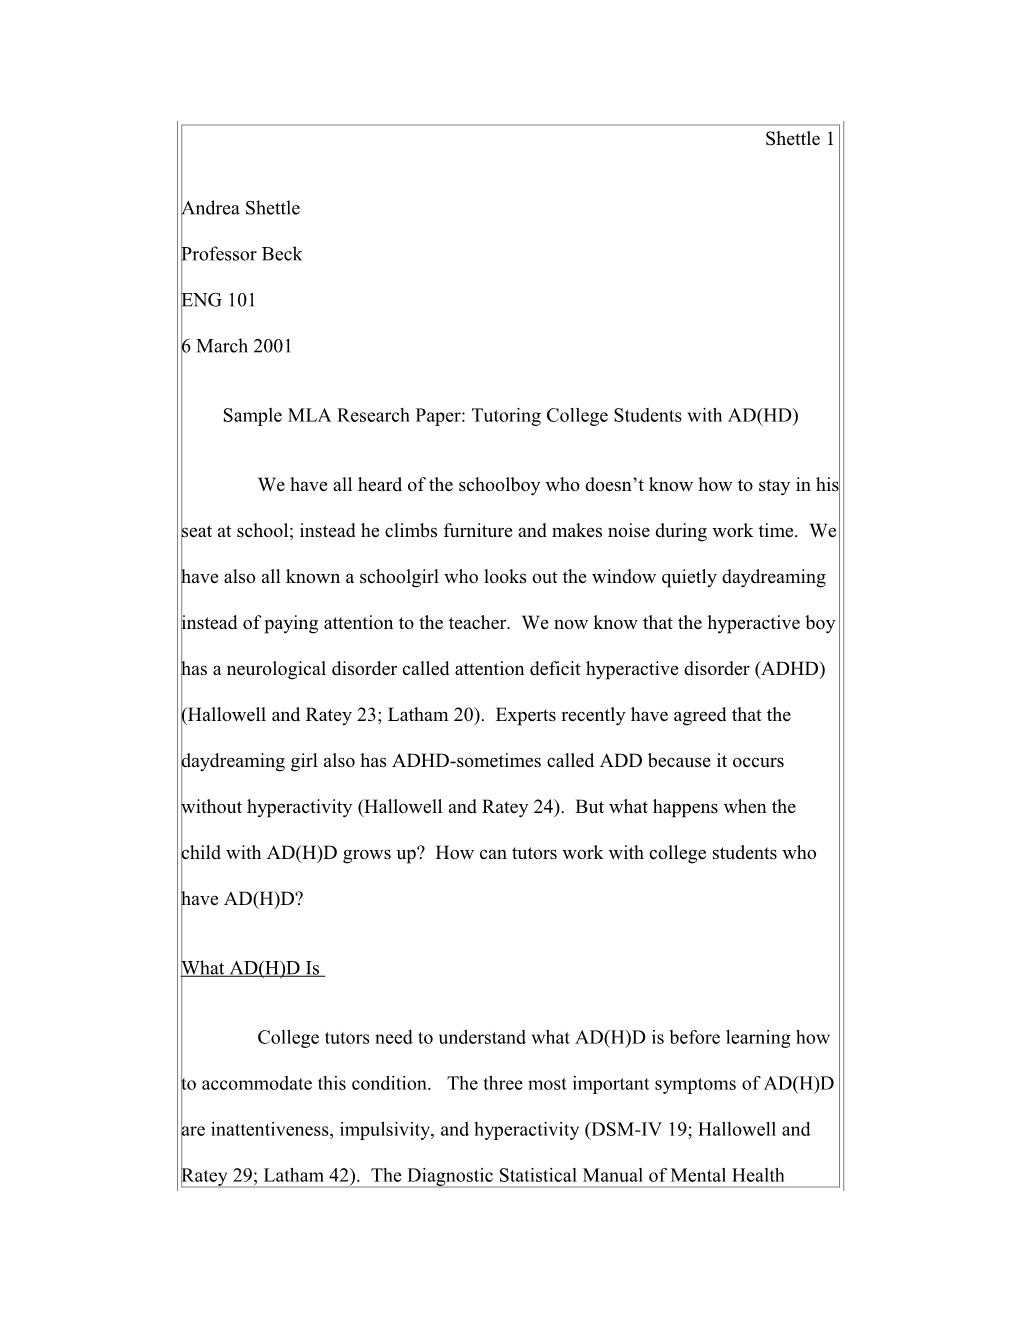 Sample MLA Research Paper: Tutoring College Students with AD(HD)